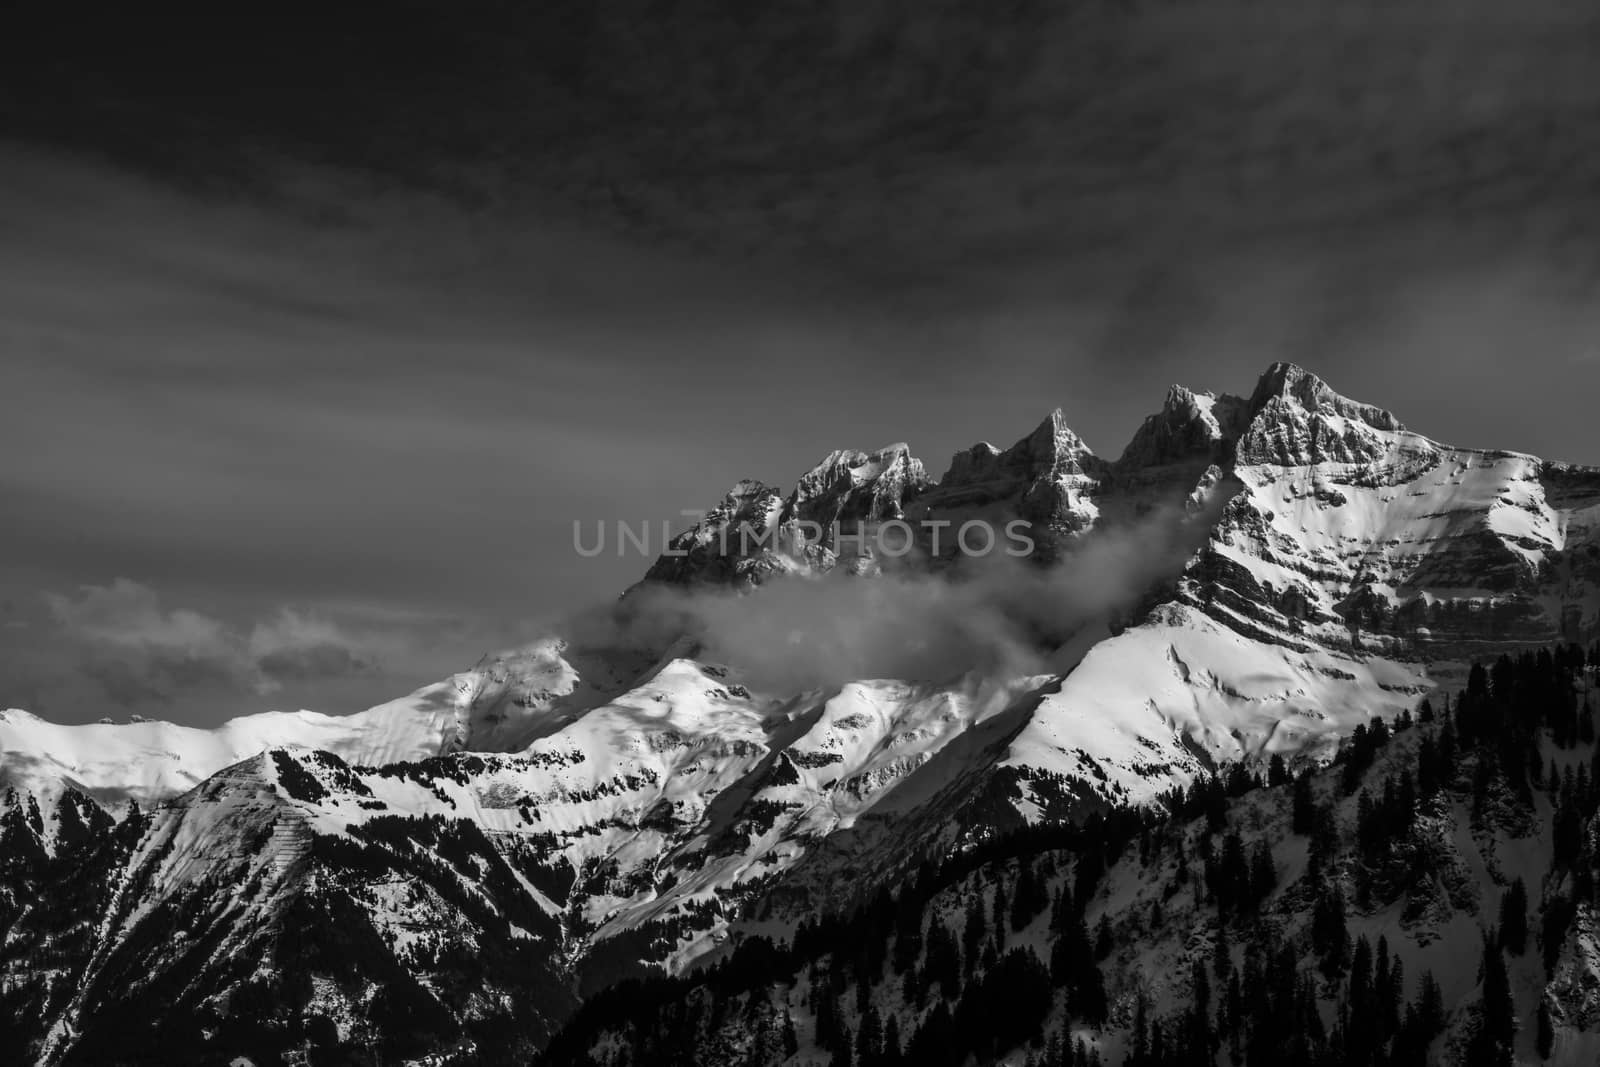 The Dent du midi in winter with snow and clouds